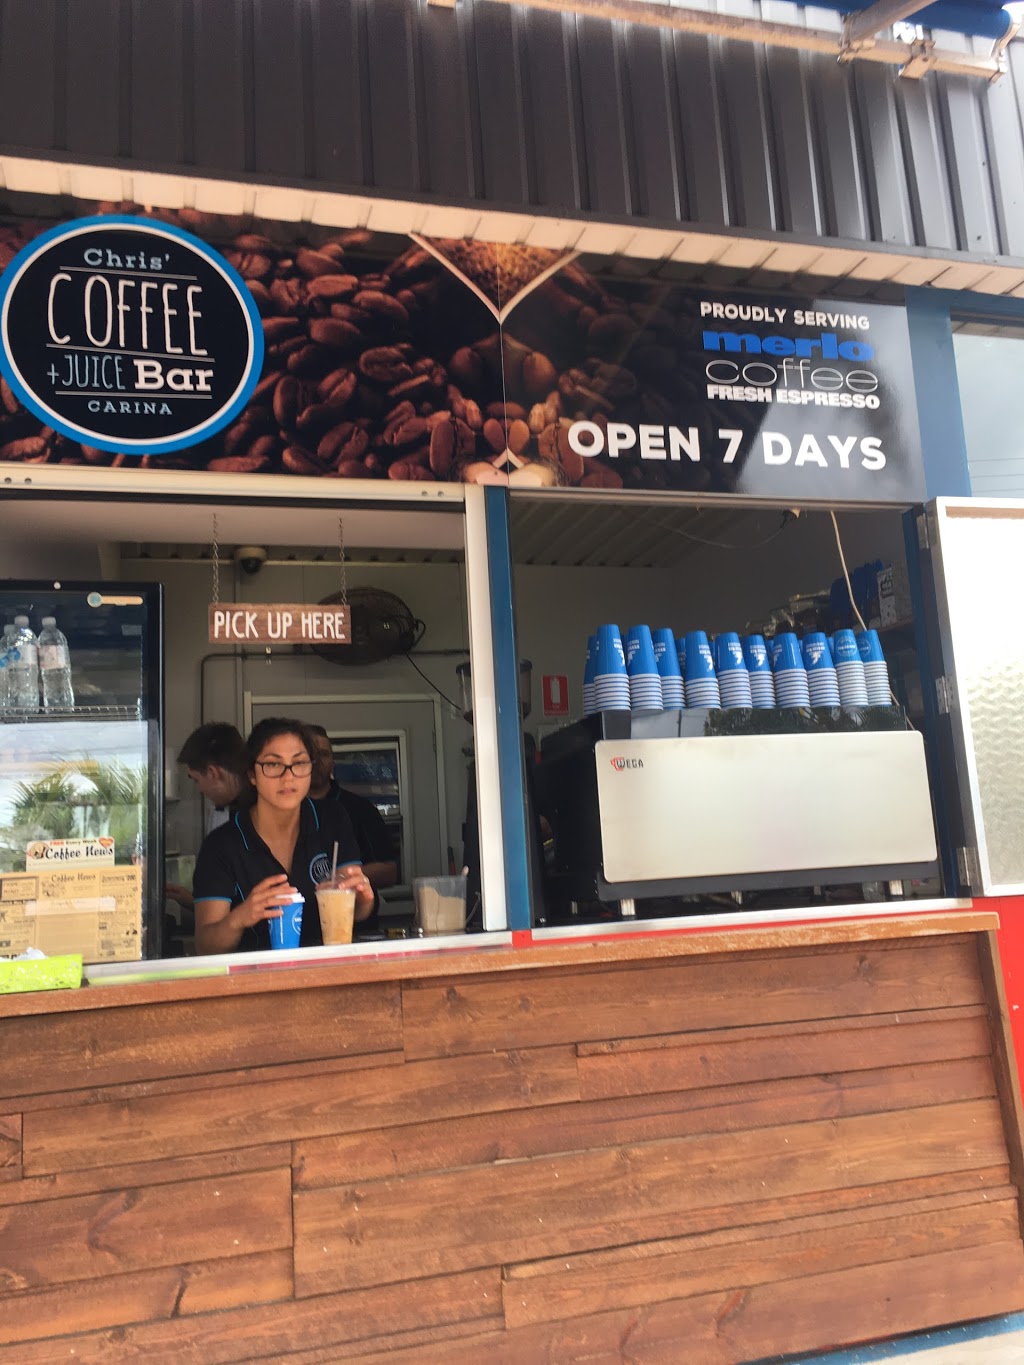 Chris Coffee and Juice Bar | cafe | 881 Old Cleveland Rd, Carina QLD 4152, Australia | 0733981634 OR +61 7 3398 1634